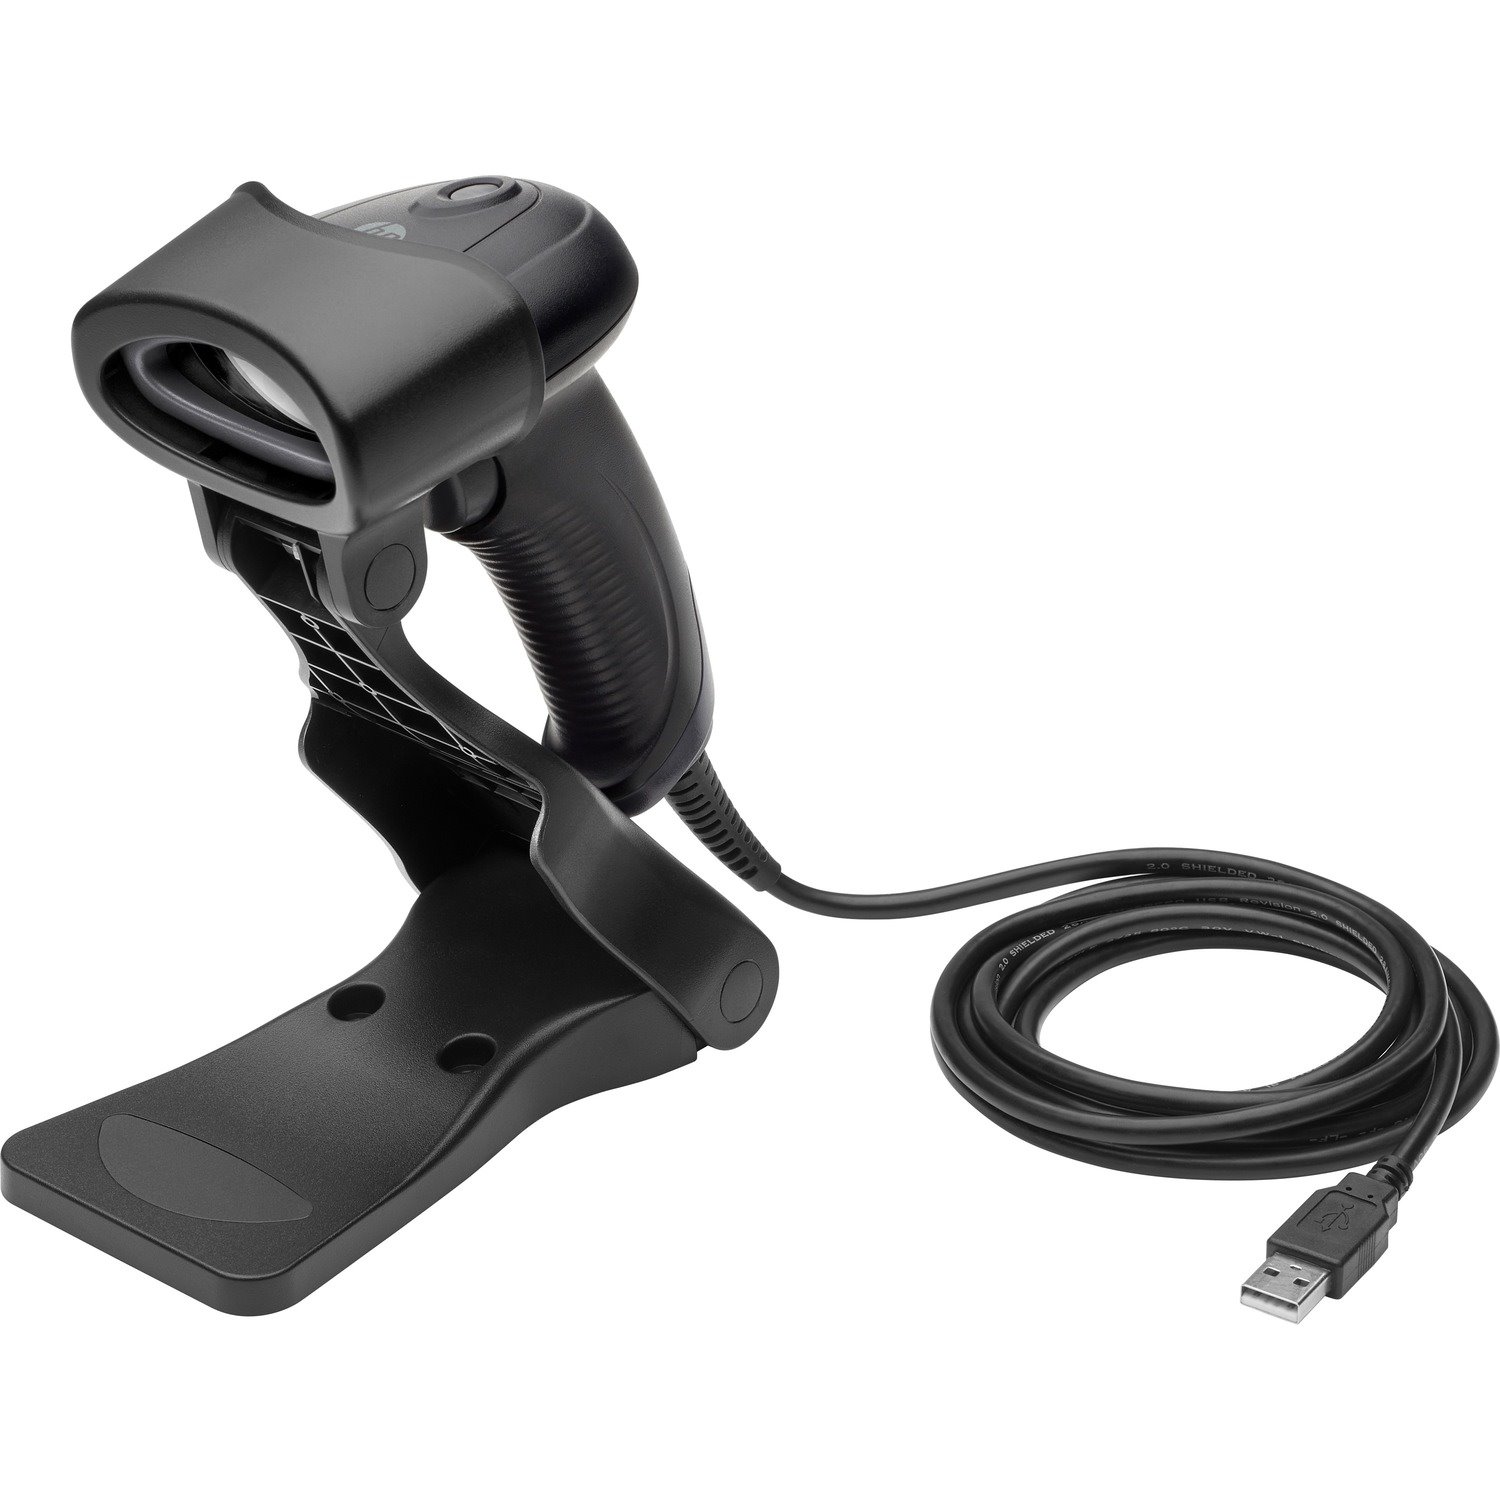 HP Value 4AK34AA Handheld Barcode Scanner - Cable Connectivity - Black - USB Cable Included